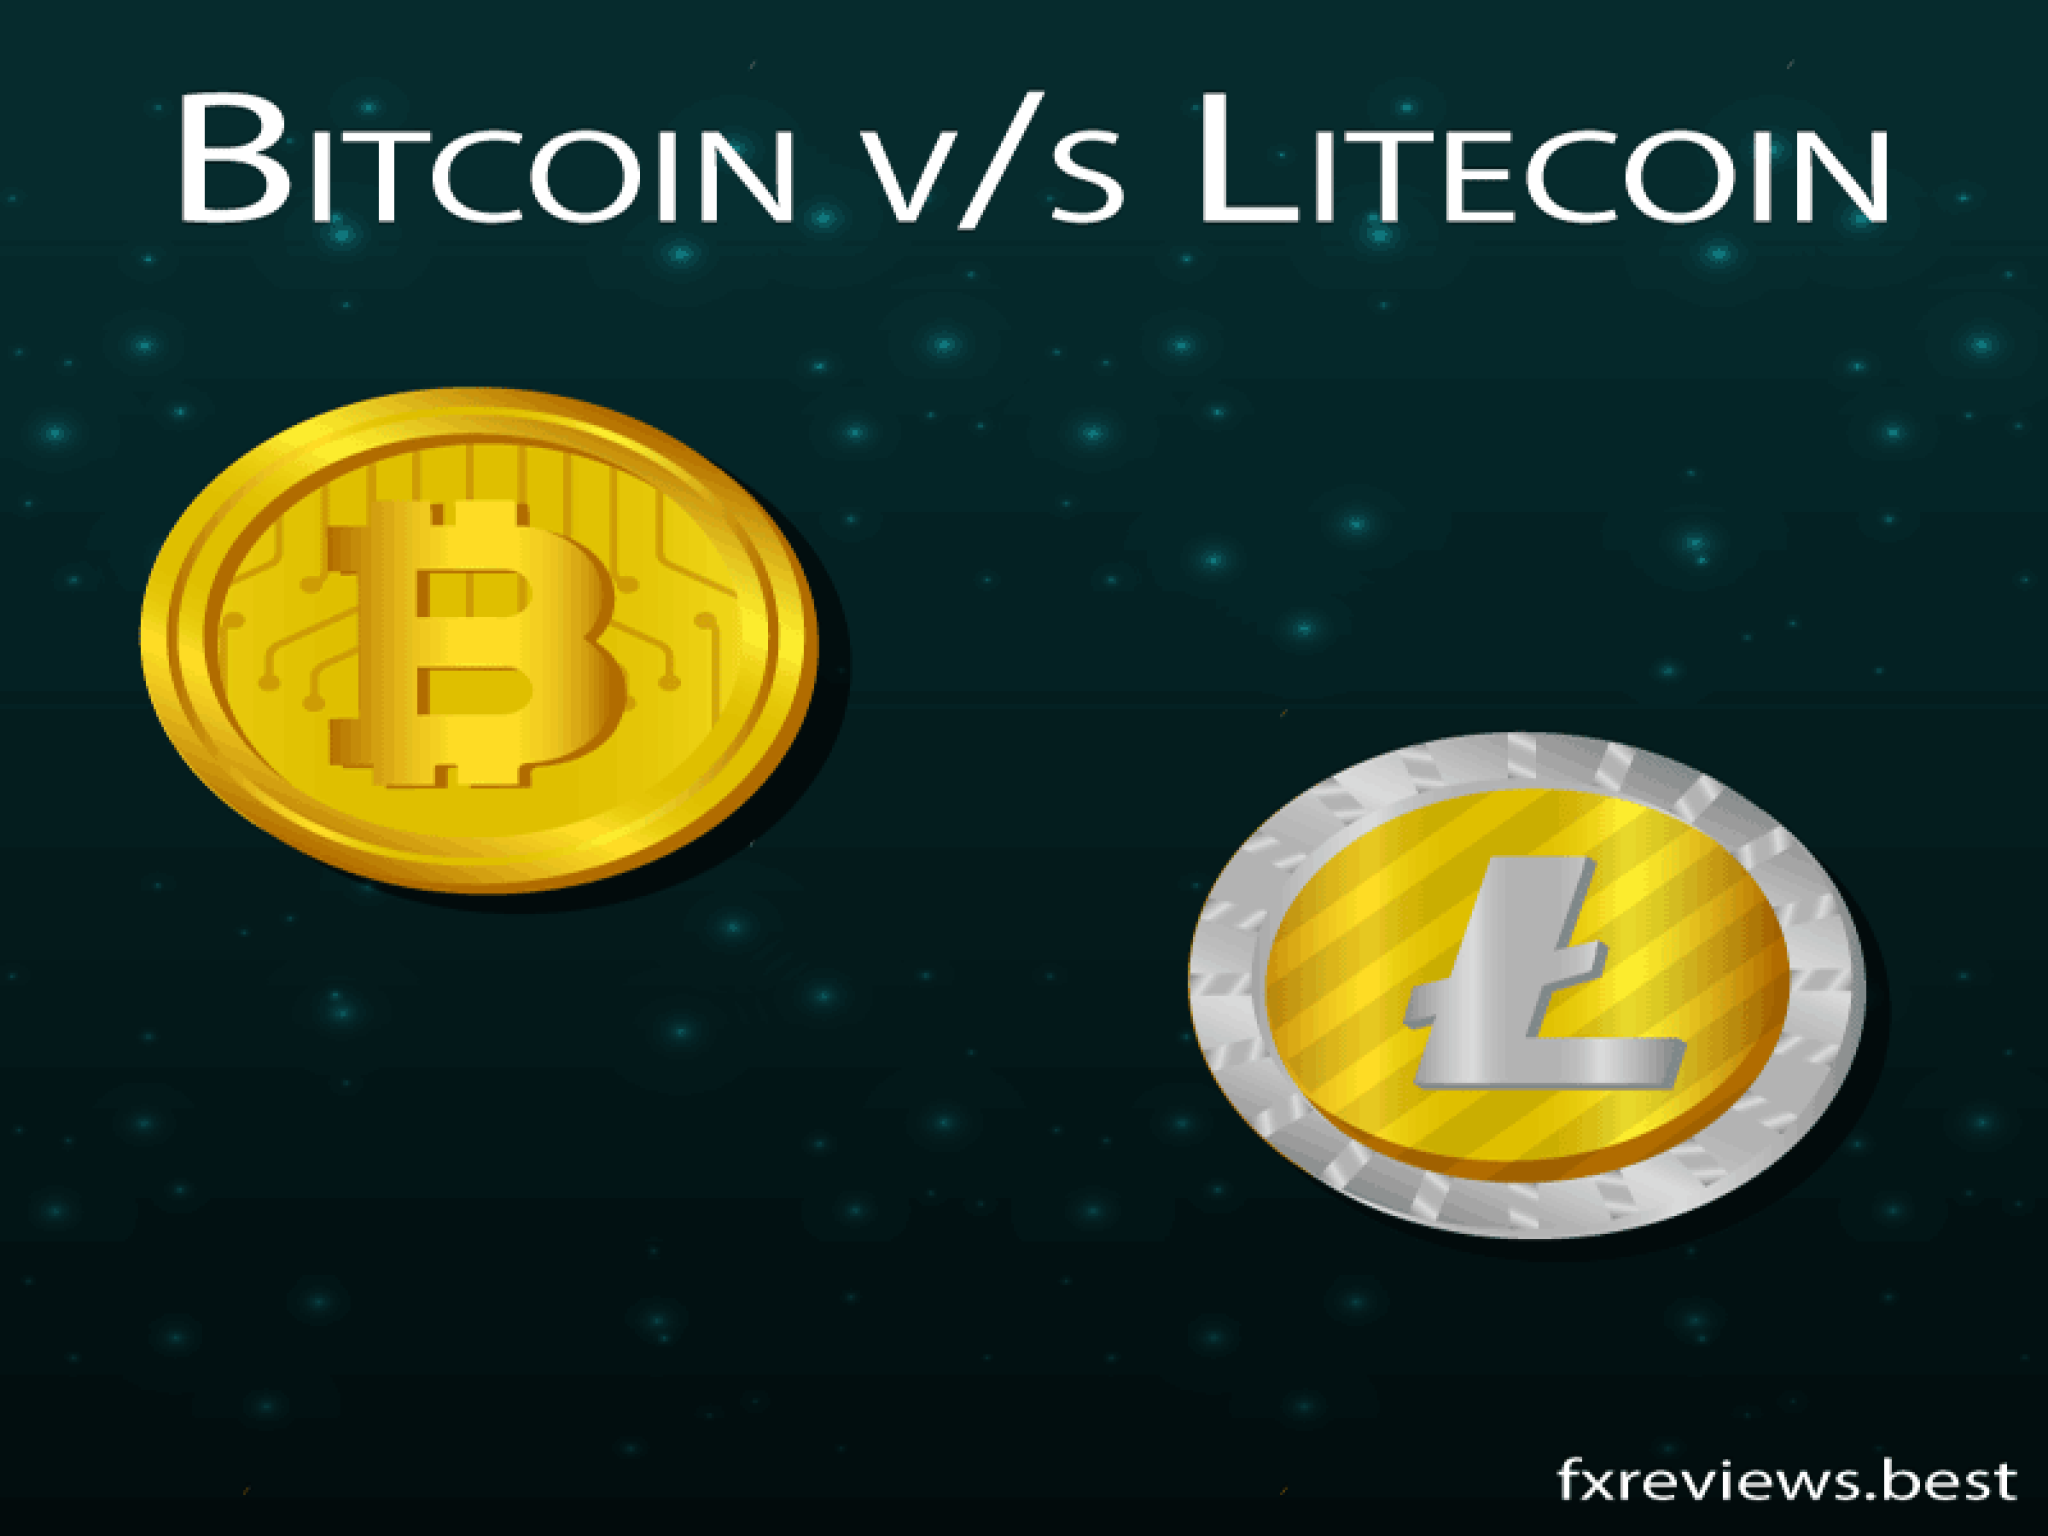 why is bitcoin higher than litecoin